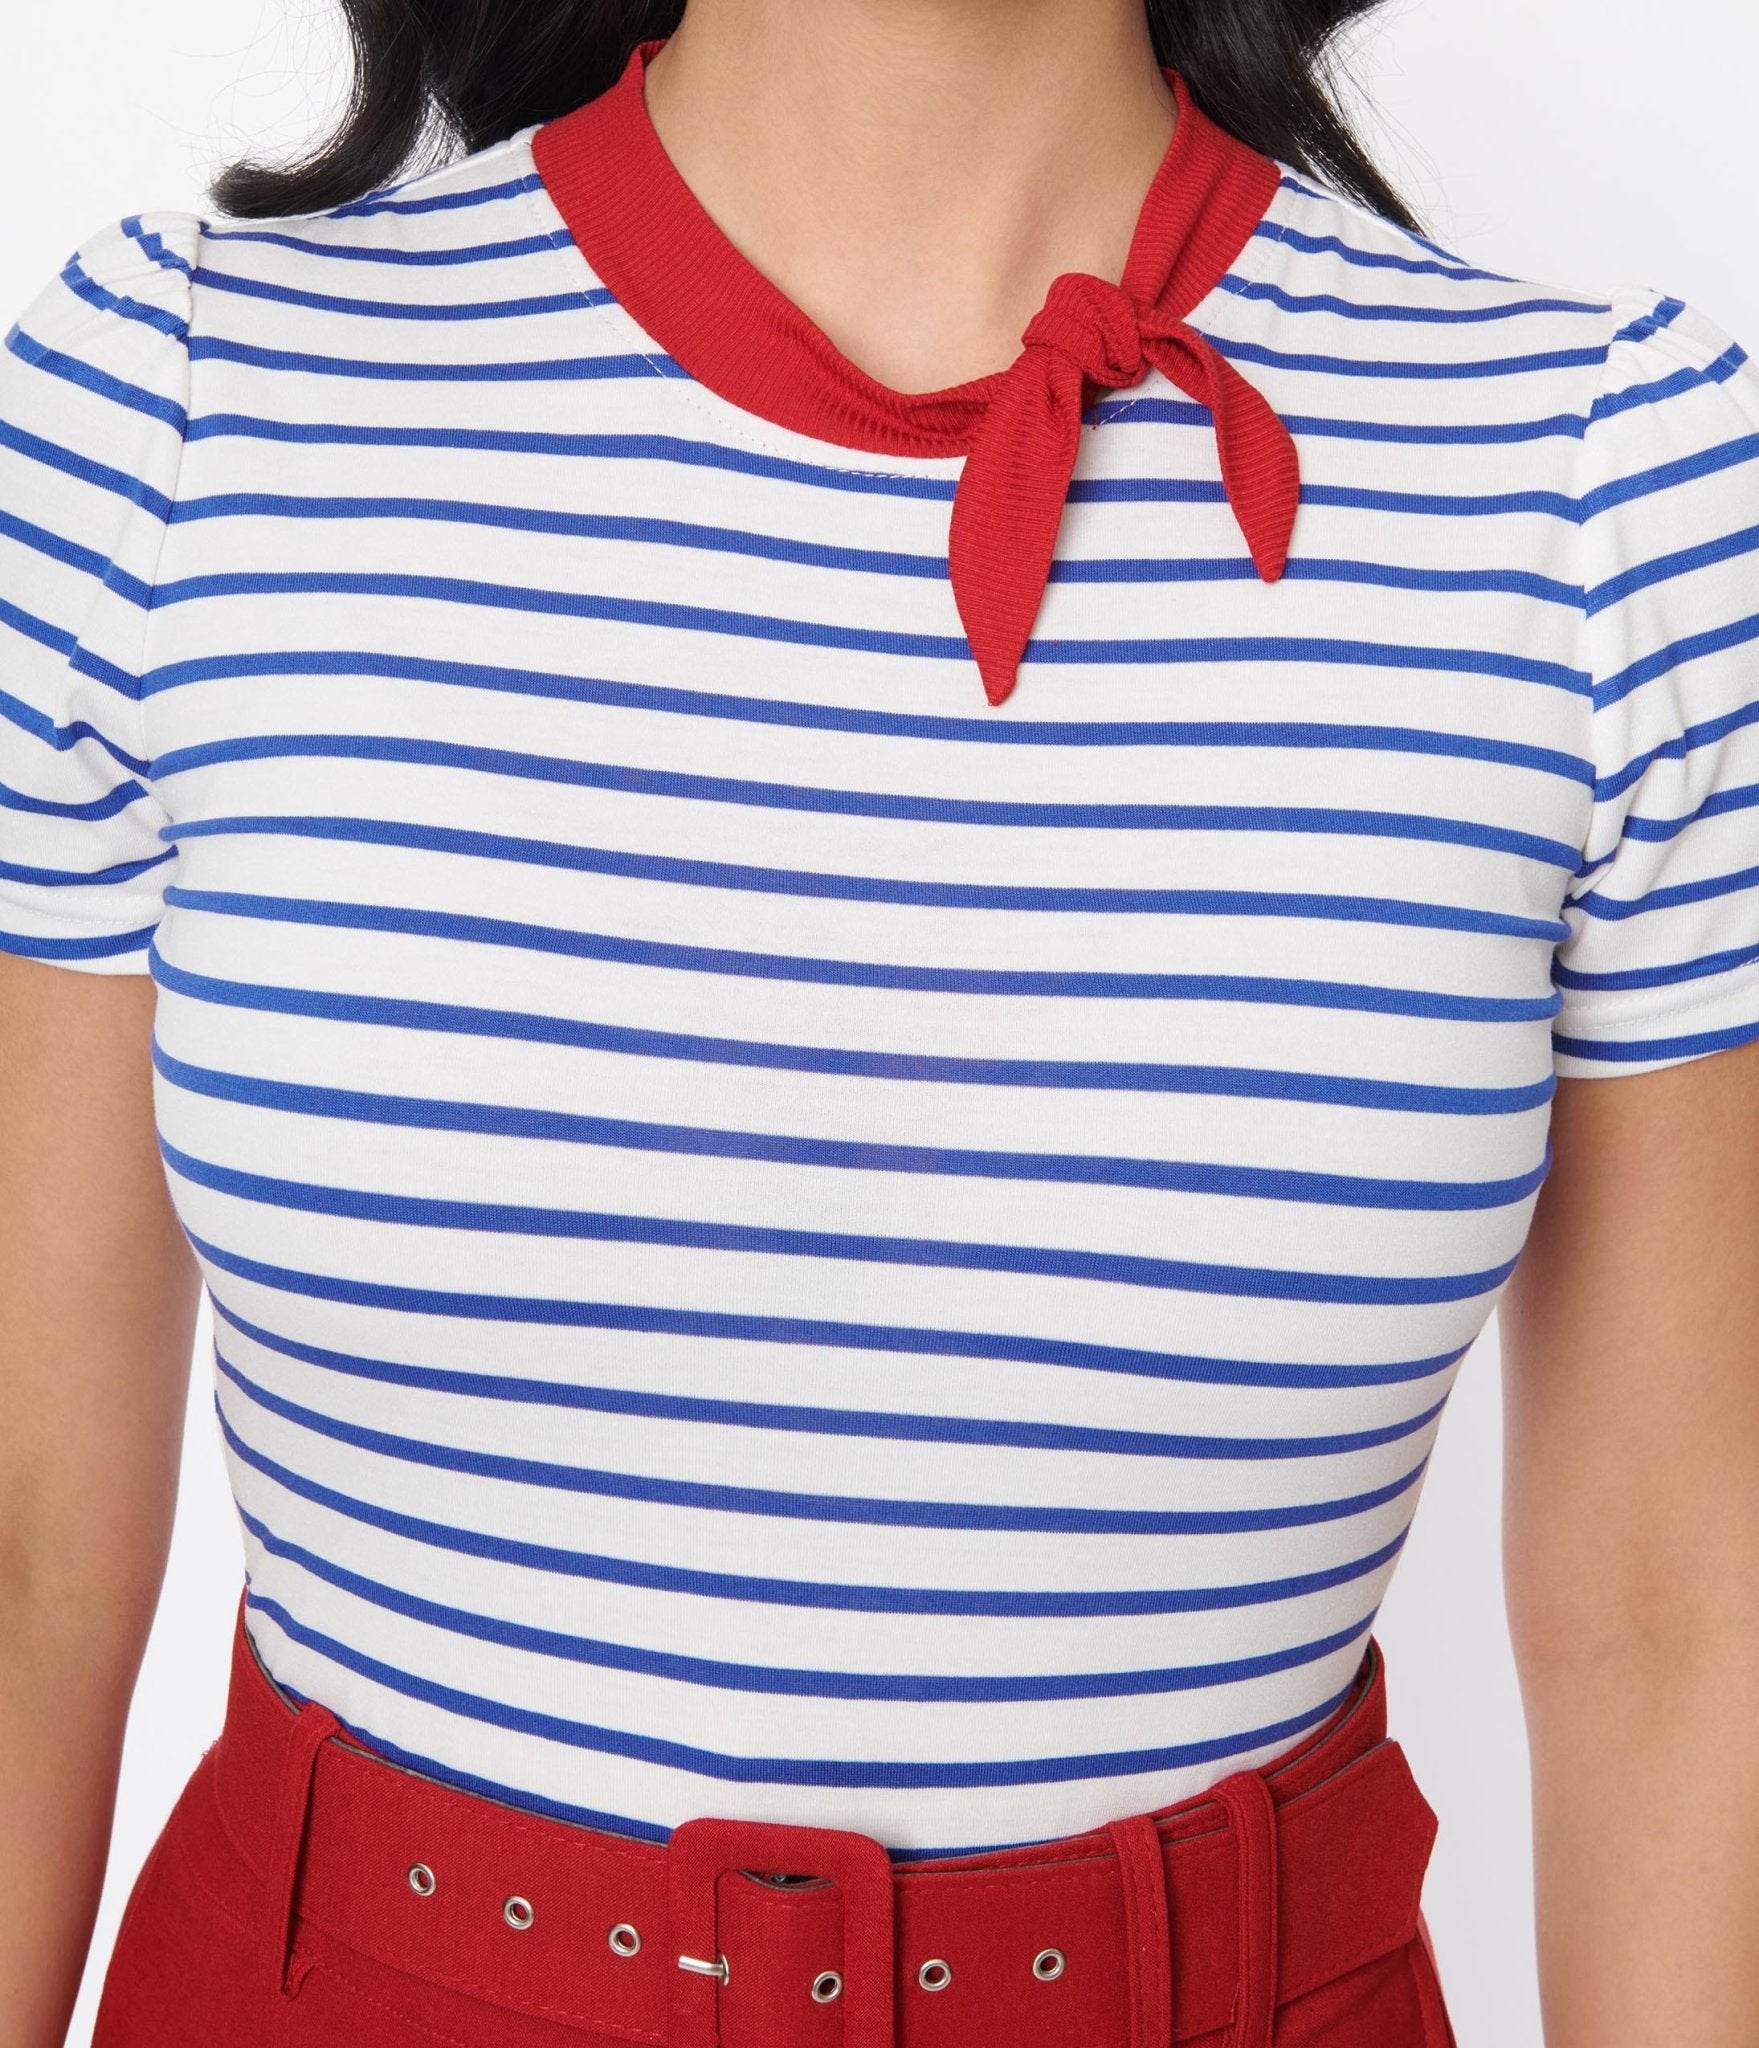 Unique Vintage Navy & White Striped Bow Sweetie Knit Top